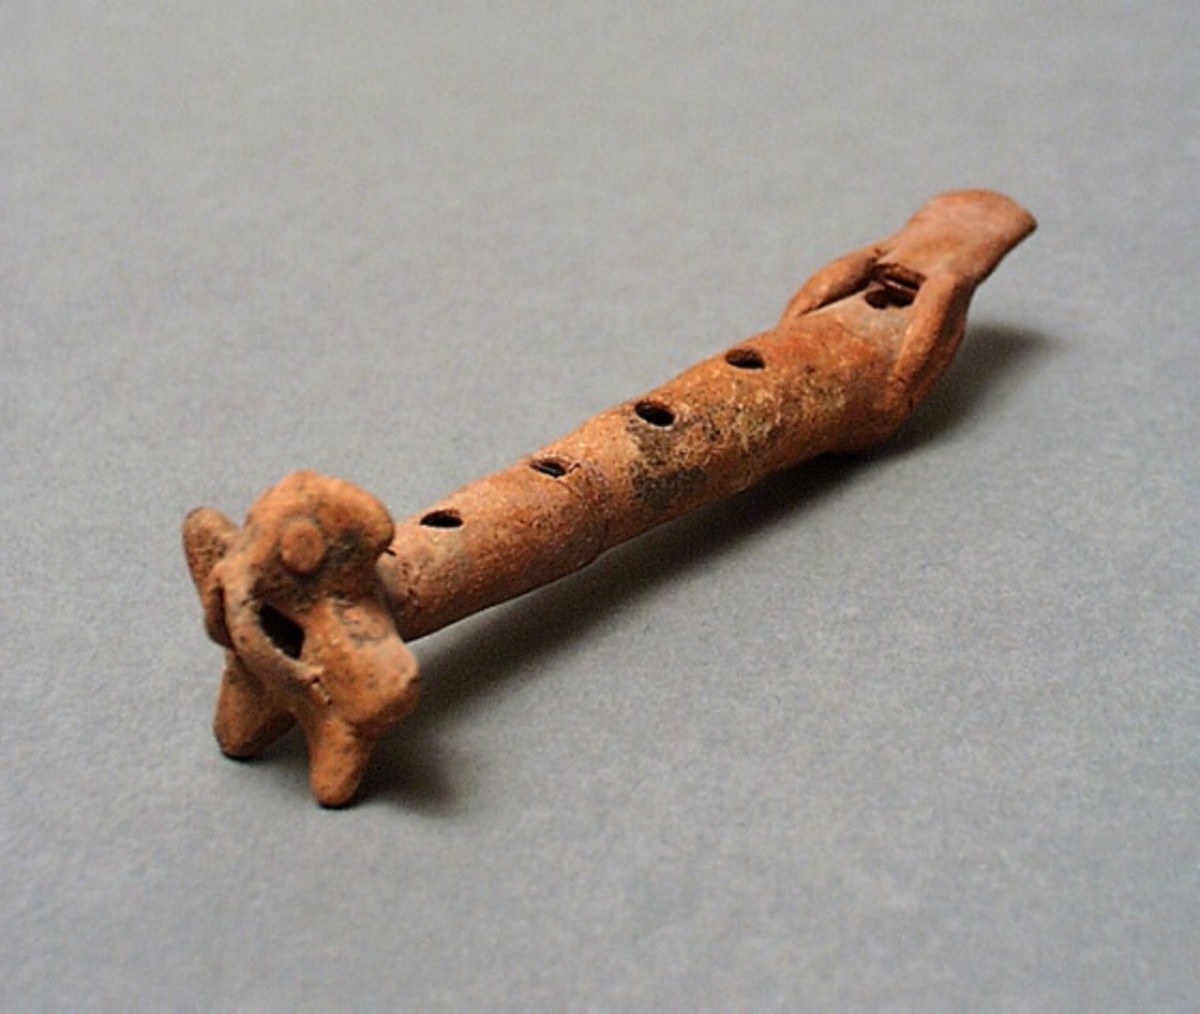 Native American Indian dog whistle or flute